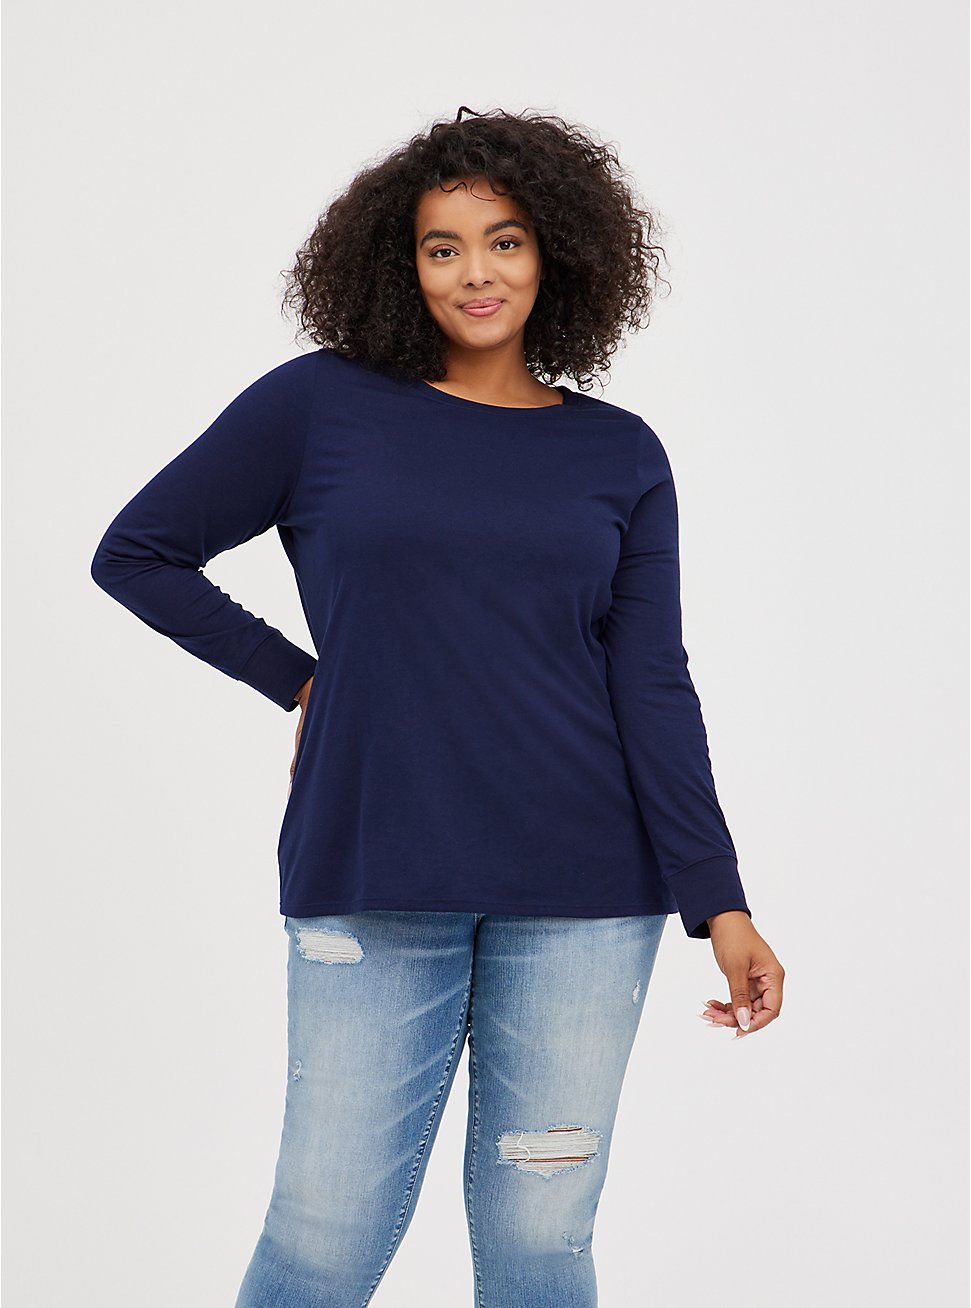 Plus Size Everyday Tee - Signature Jersey Navy, PEACOAT, hi-res